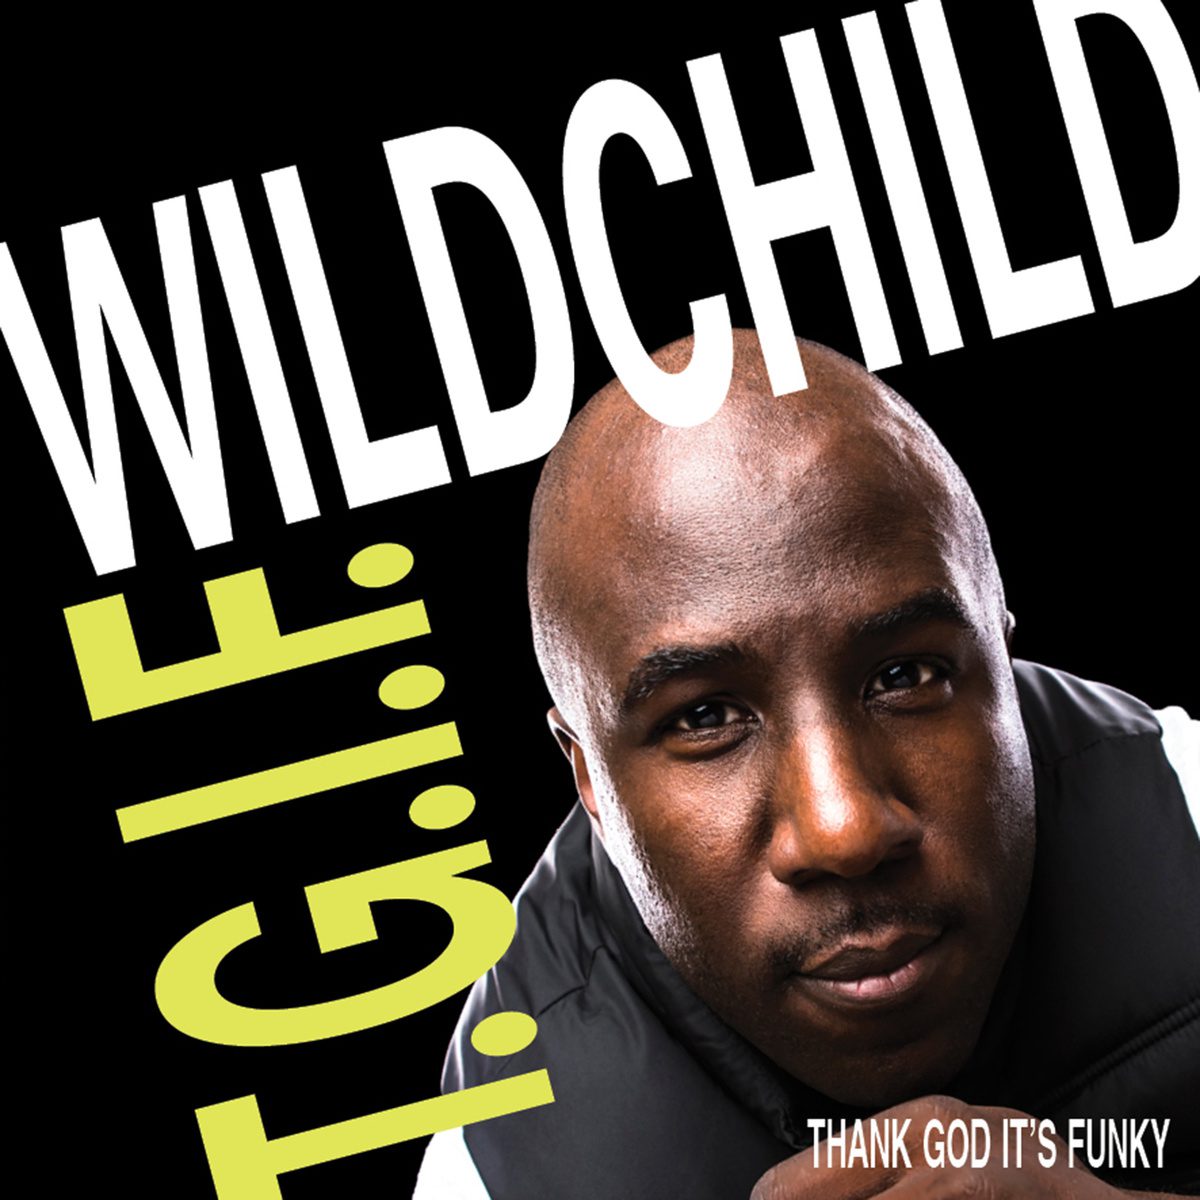 Wildchild Gives Up the Funk